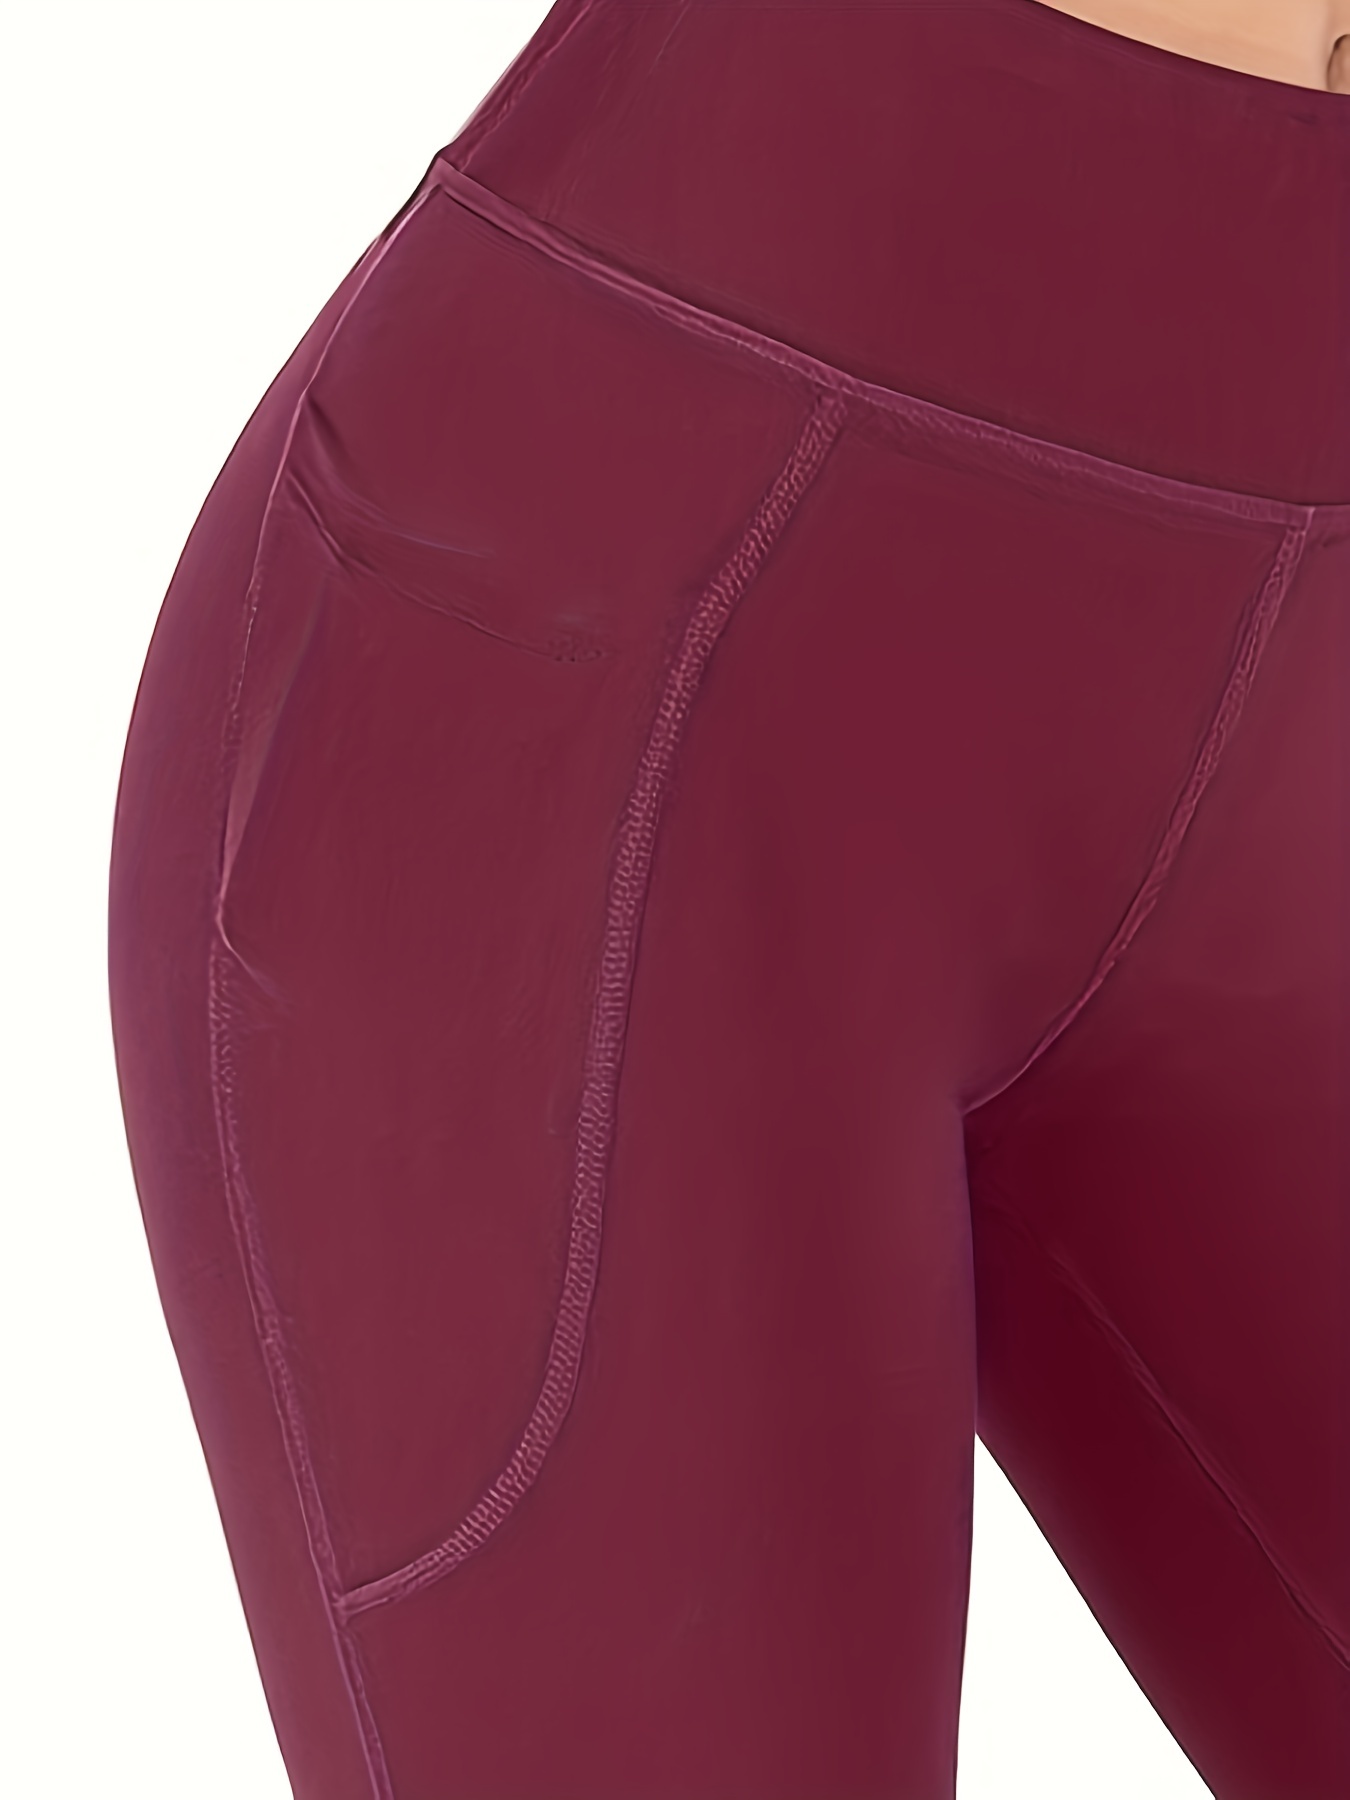 Bootcut Yoga Pants with Pockets for Women High Waist,Gym Workout Flare Leggings  Tummy Control Burgundy Small